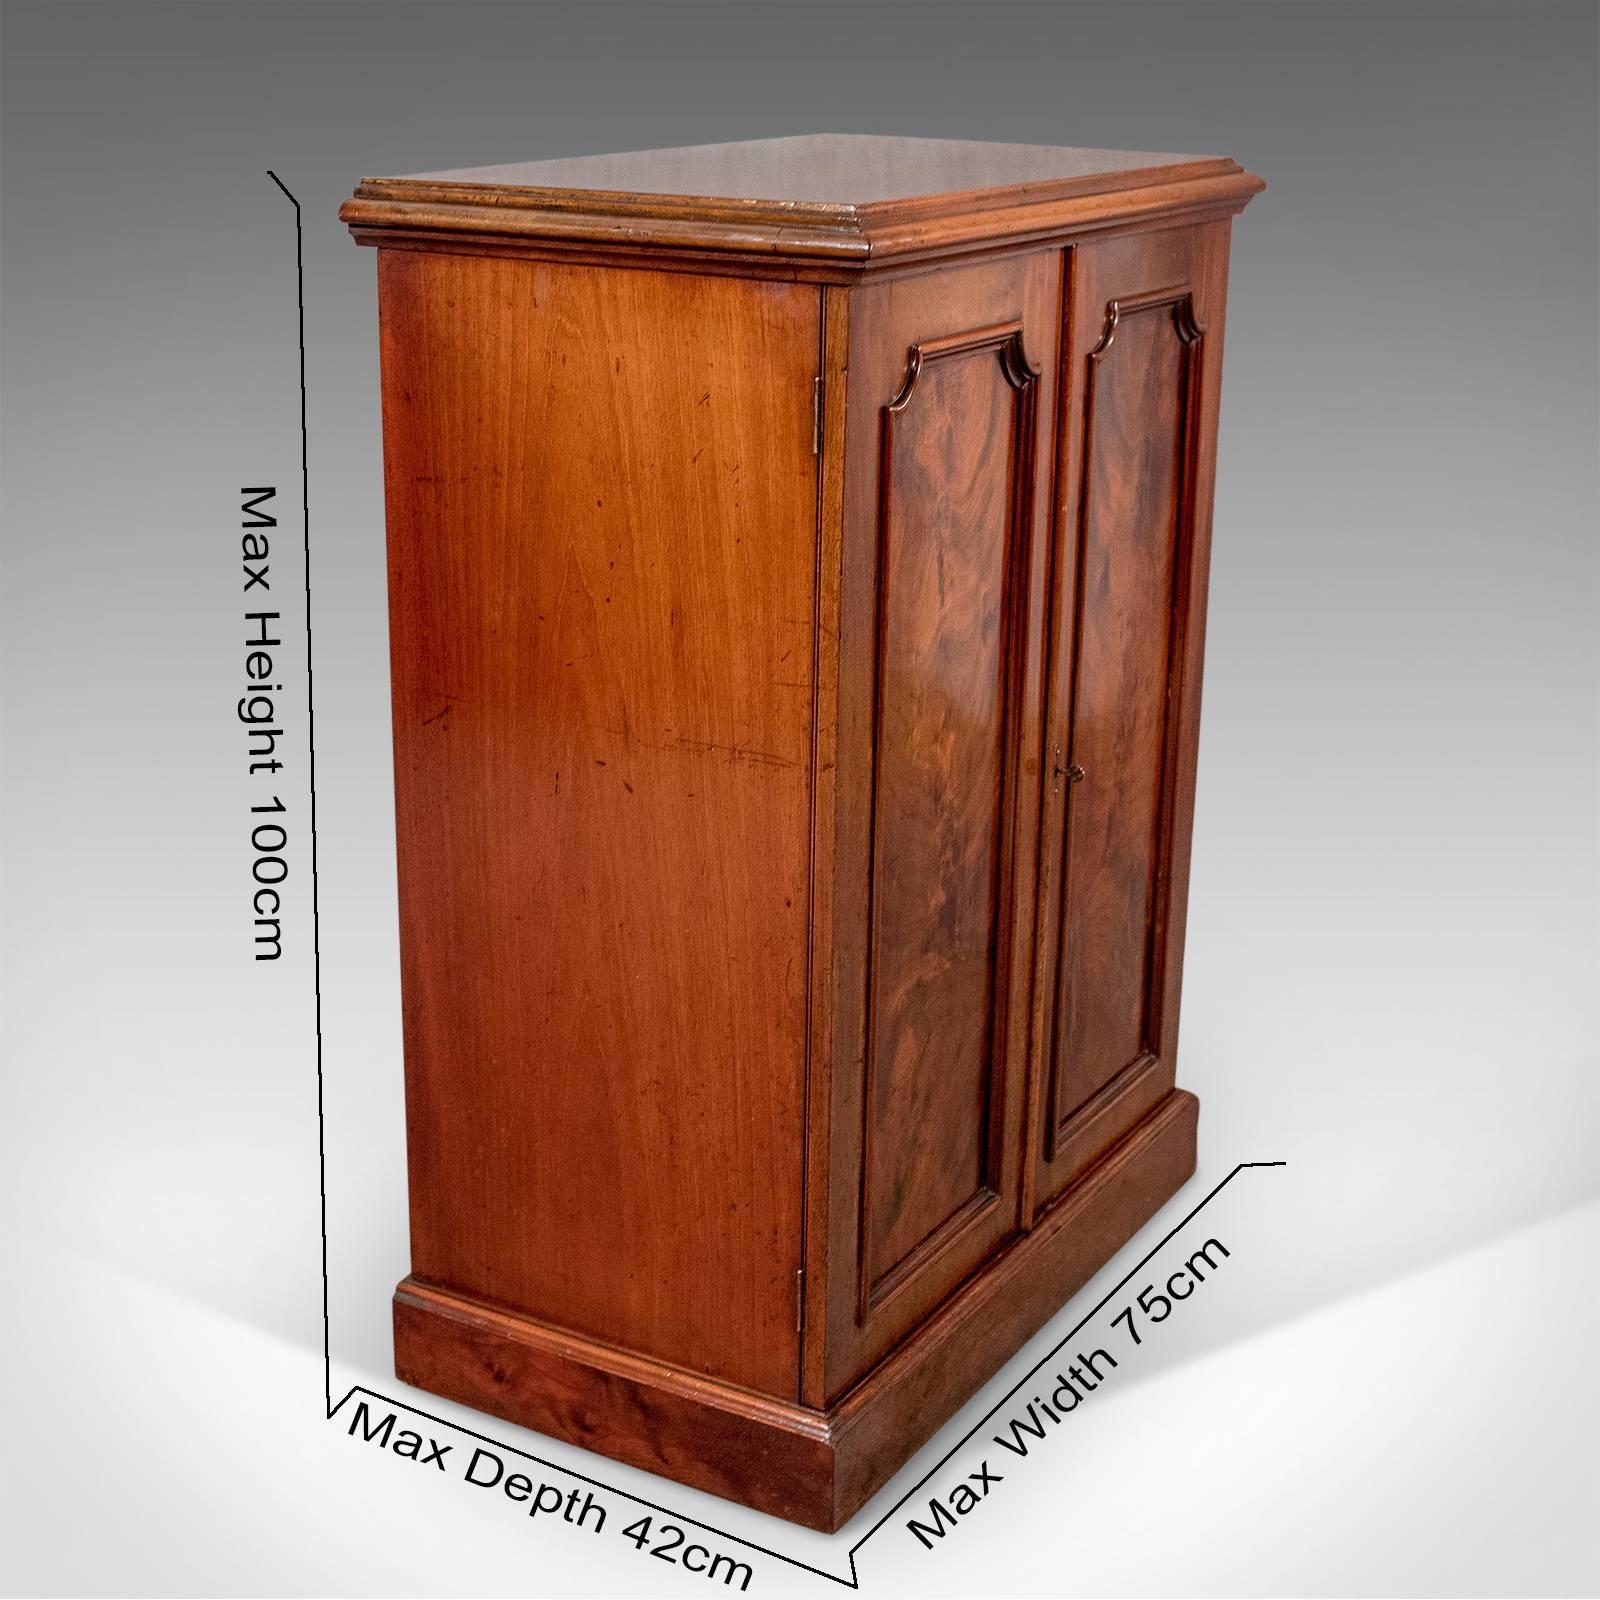 A most pleasing side cabinet presented in good antique condition
by the noted maker George Davis, of Plymouth, England
With Classic Victorian detailing to this well crafted item of functional furniture
Delightfully dressed with fine flame